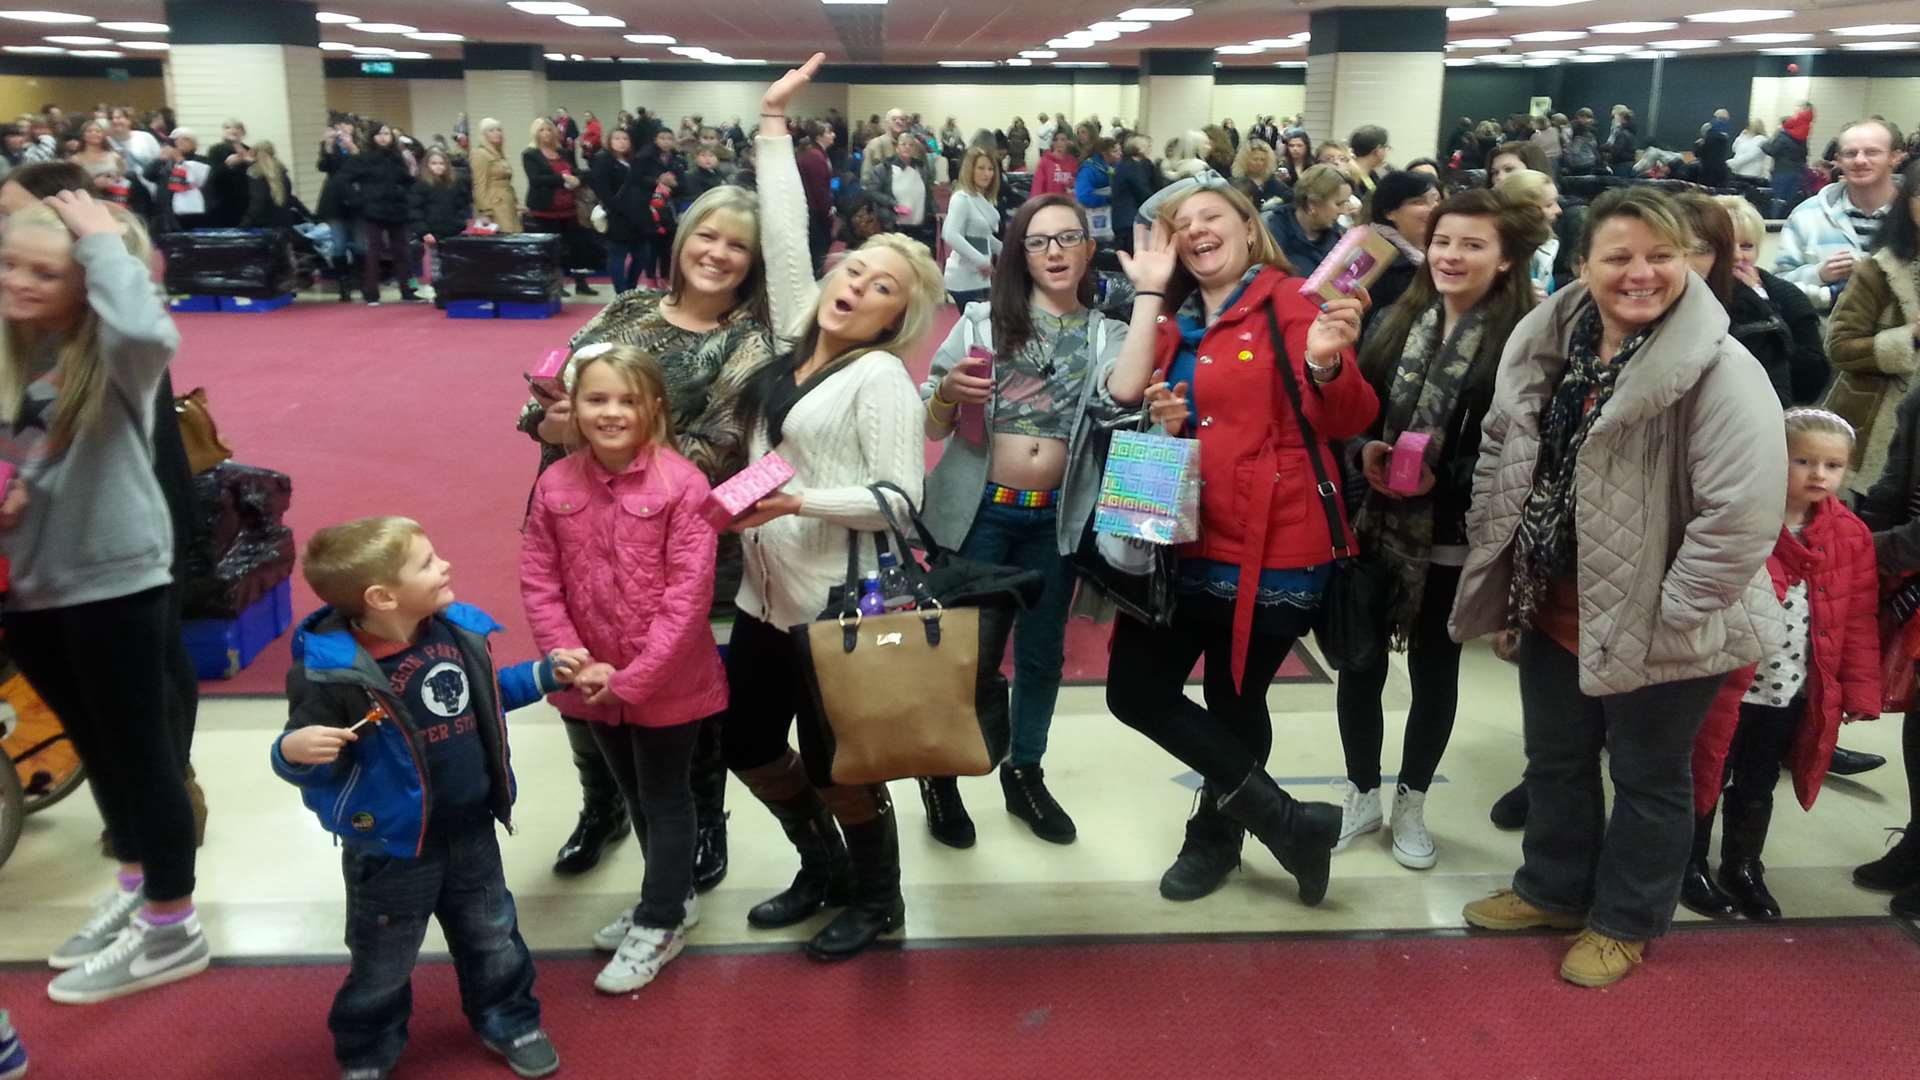 Excited fans queue to see Peter Andre